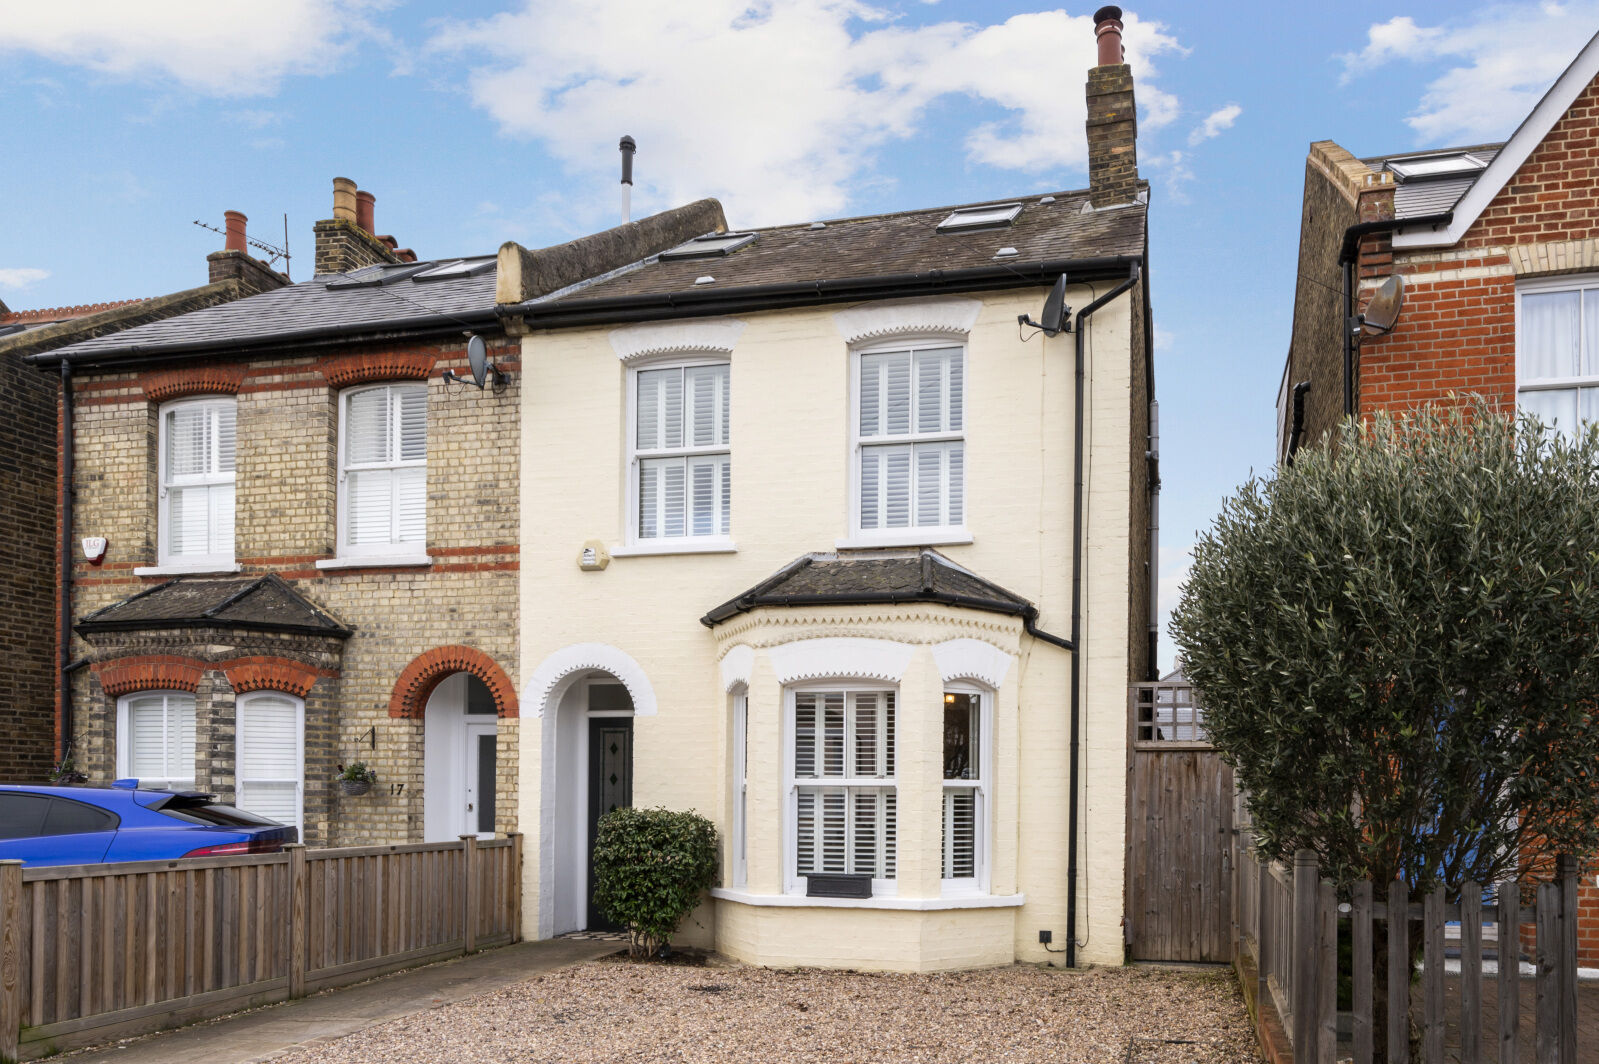 4 bedroom semi detached house for sale Amity Grove, London, SW20, main image